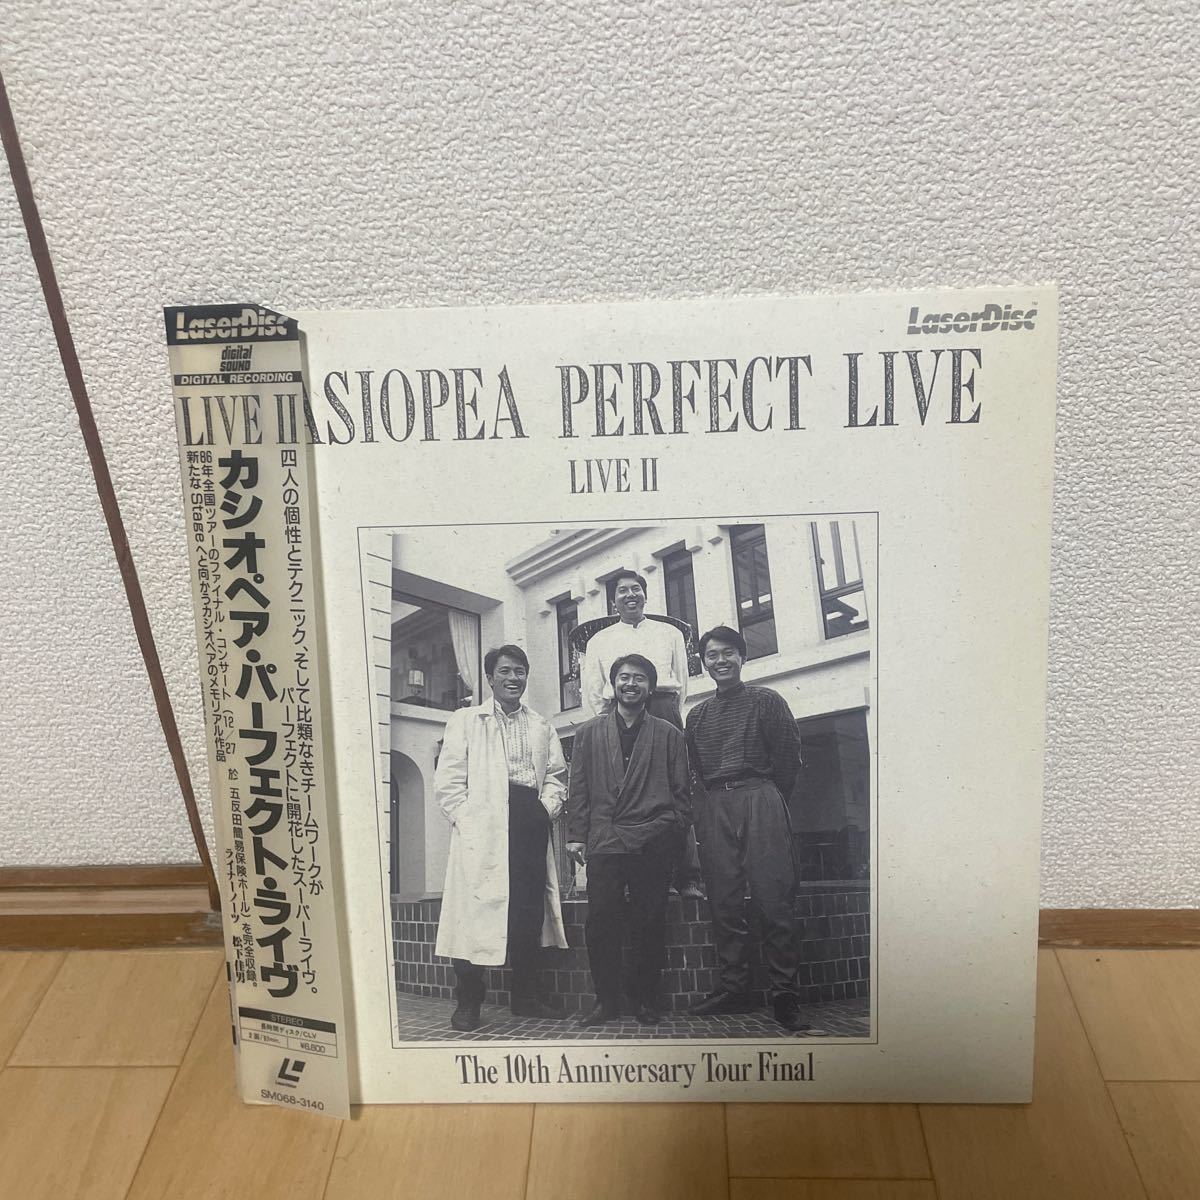 LD laser disk Casiopea Perfect live Ⅱ live